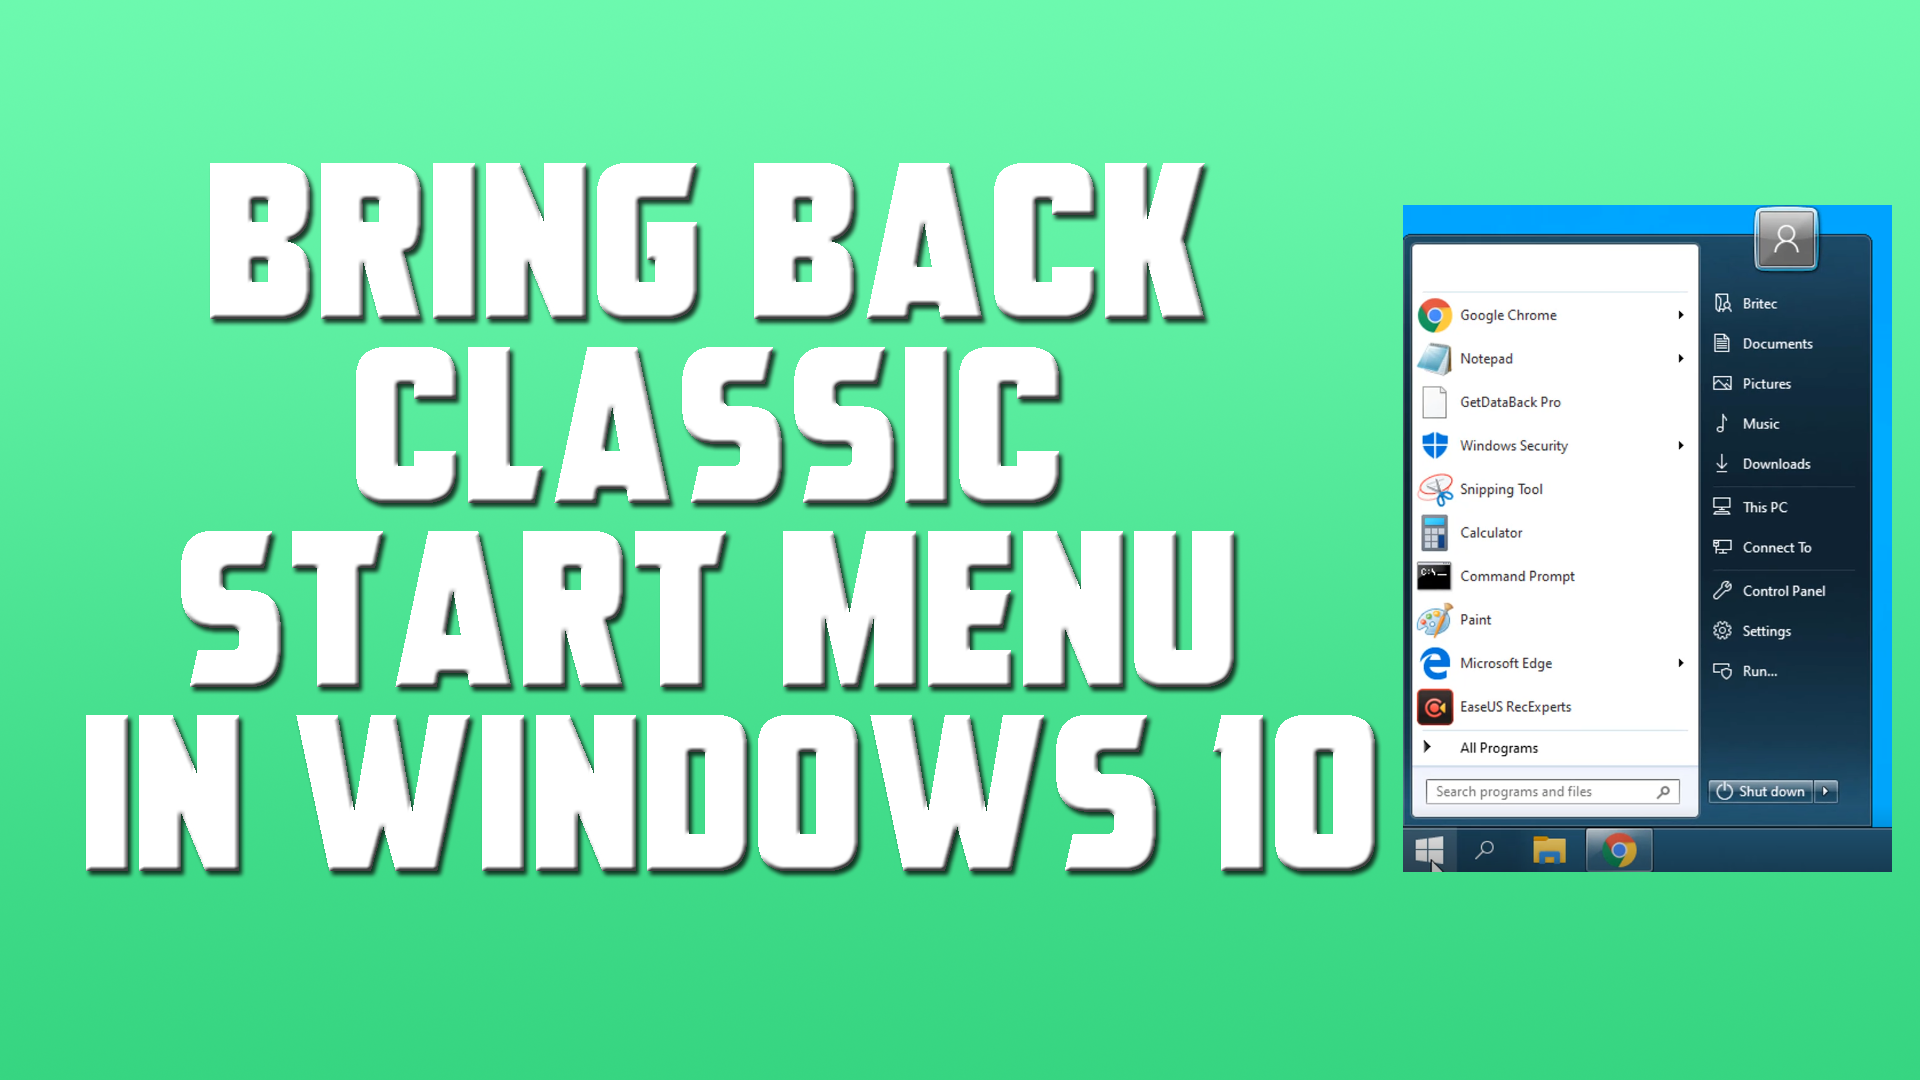 Bring Back The Classic Start Menu in Windows 10 - Malware Removal, PC ...